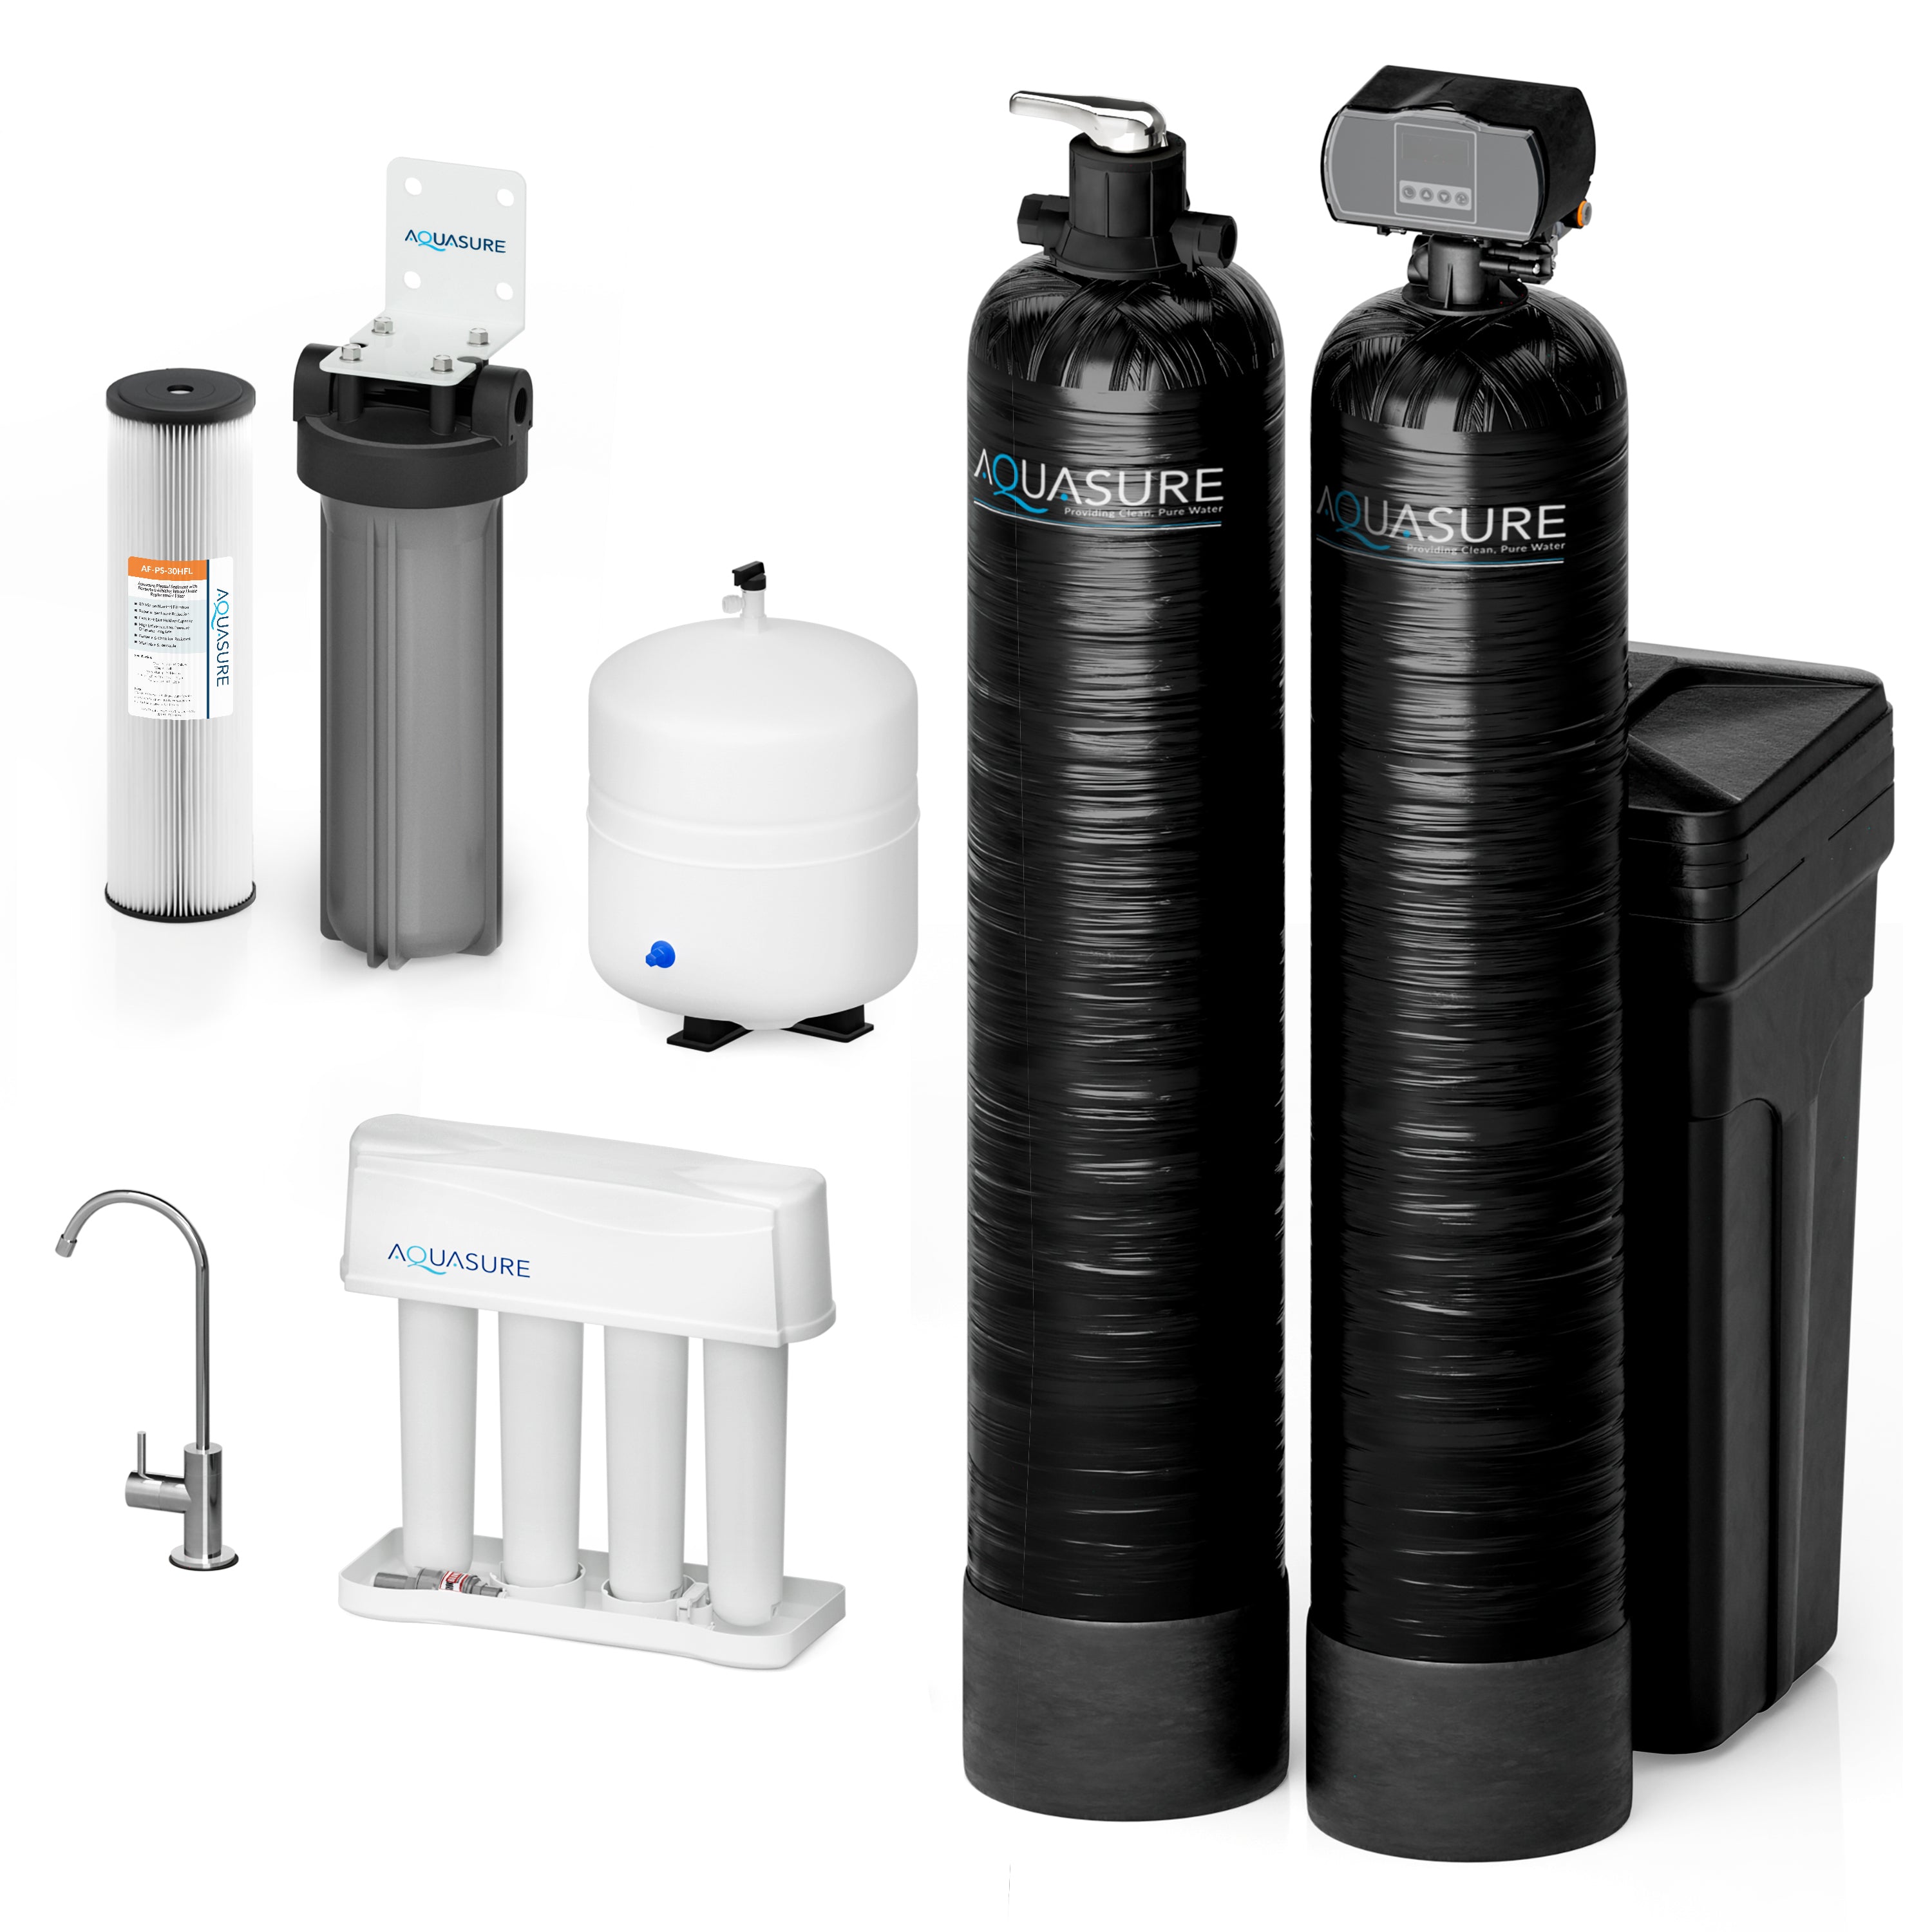 Signature Elite | 1,000,000 Gallons Whole House Water Filter Treatment Bundle with 48,000 Grains Softener w/ Fine Mesh Resin, 75 GPD Reverse Osmosis System